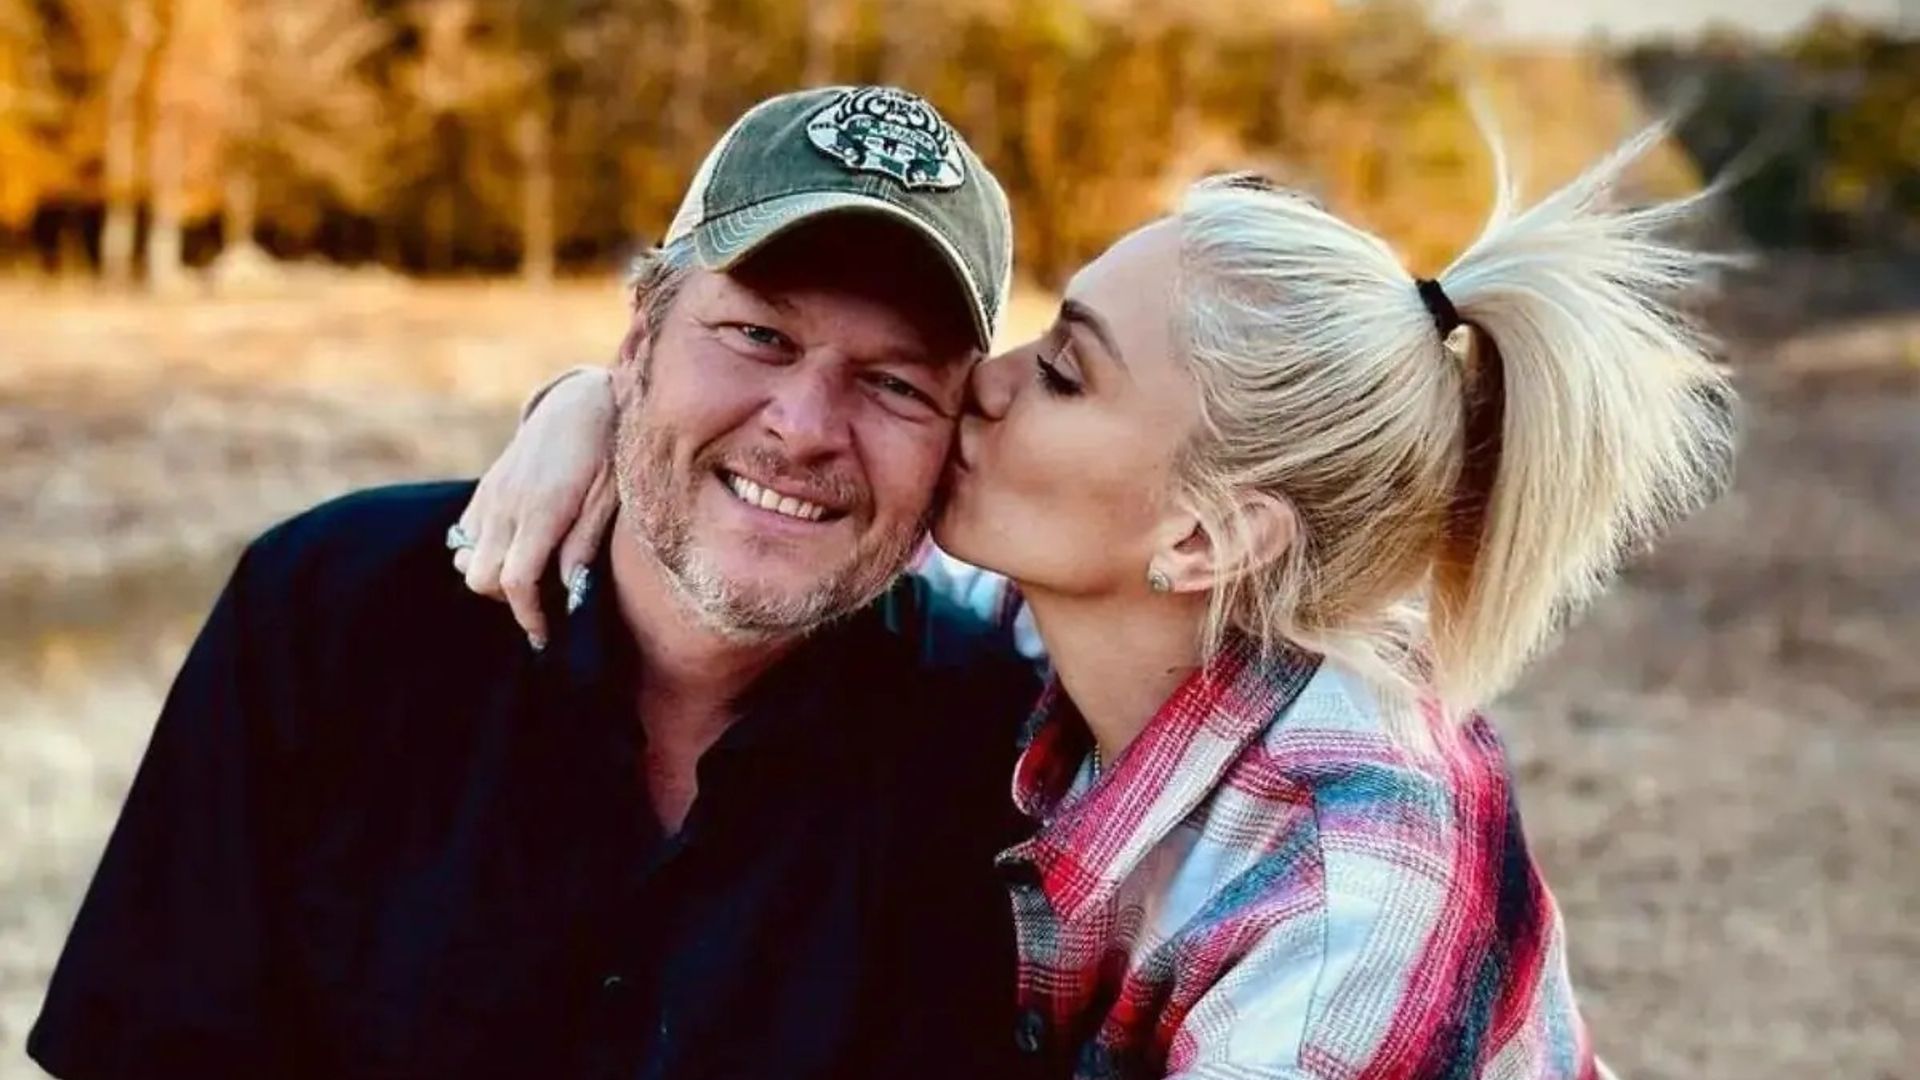 Gwen Stefani confirms she is returning to The Voice with Blake Shelton 